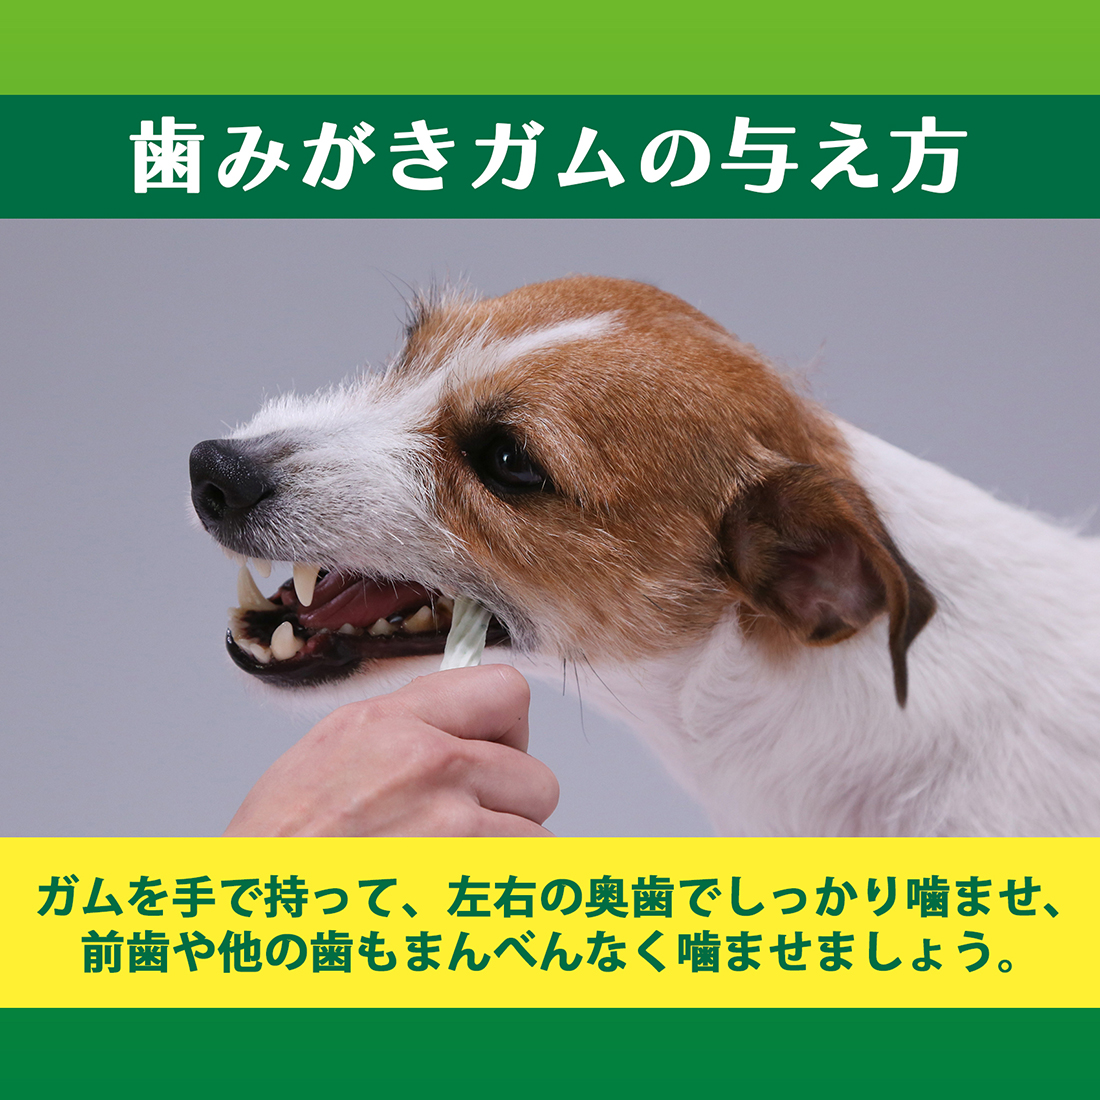 PETKISS 食後の歯みがきガム 小型犬用｜ライオンペット株式会社